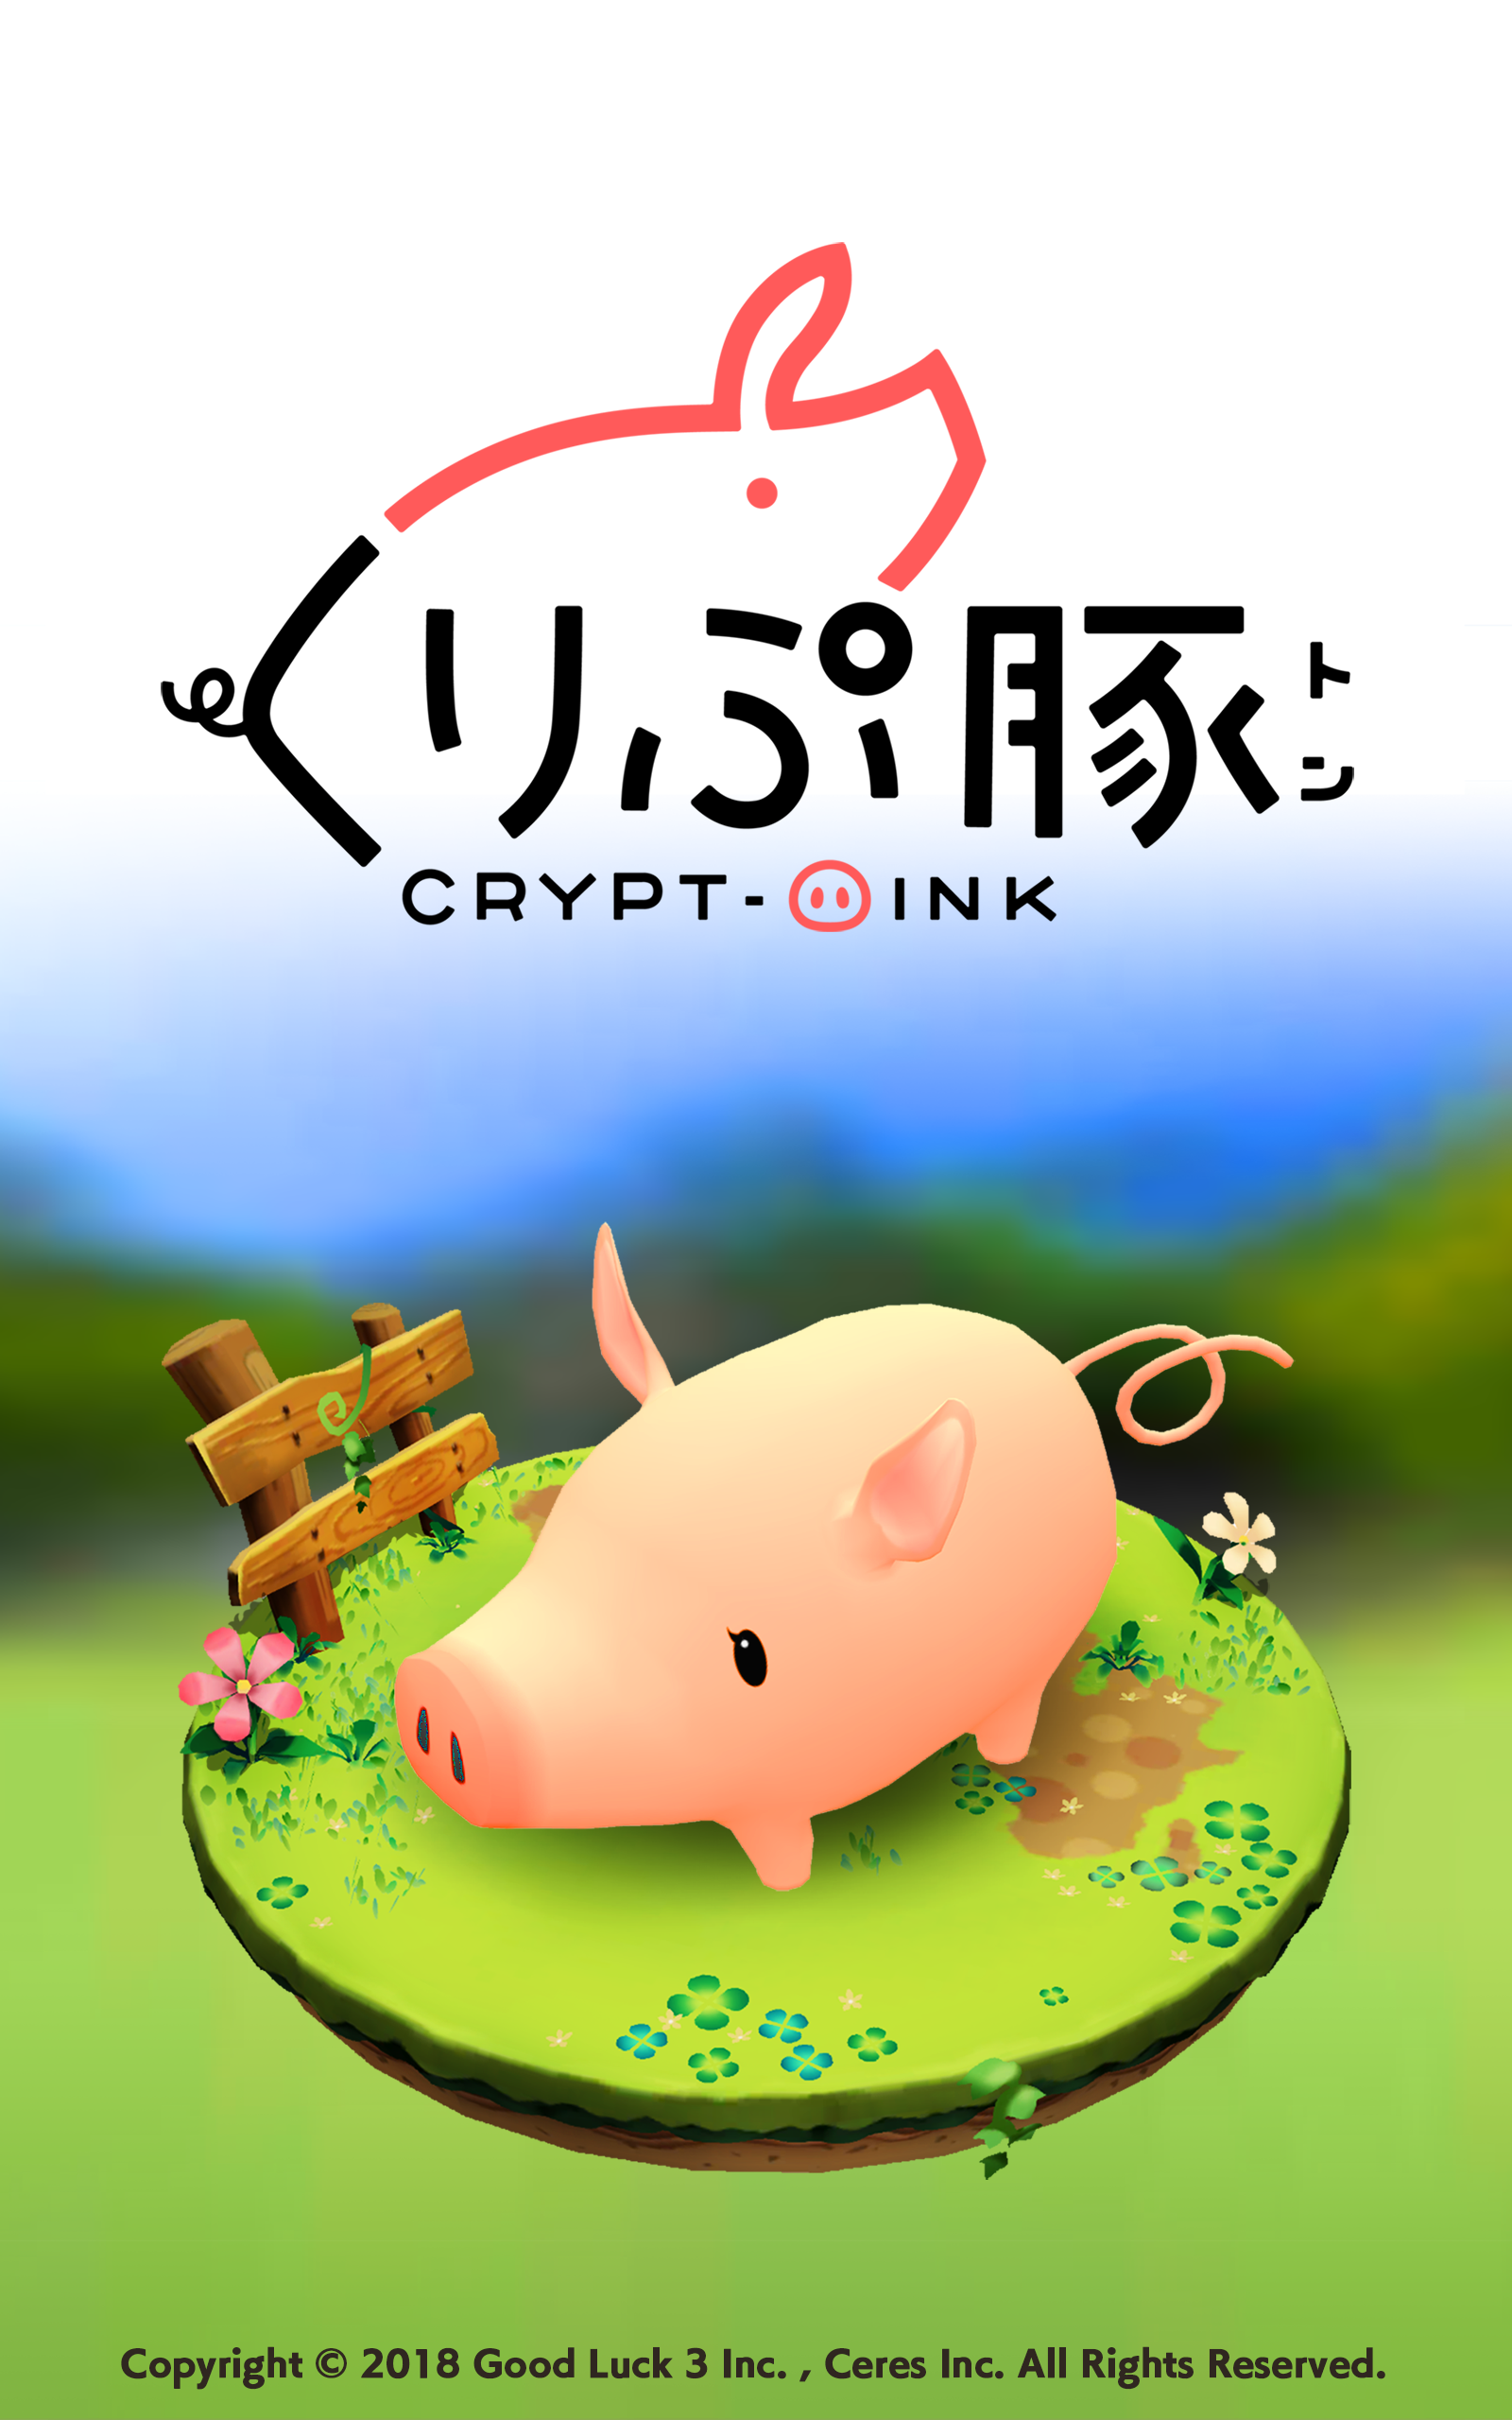 Screenshot of Crypt-Oink